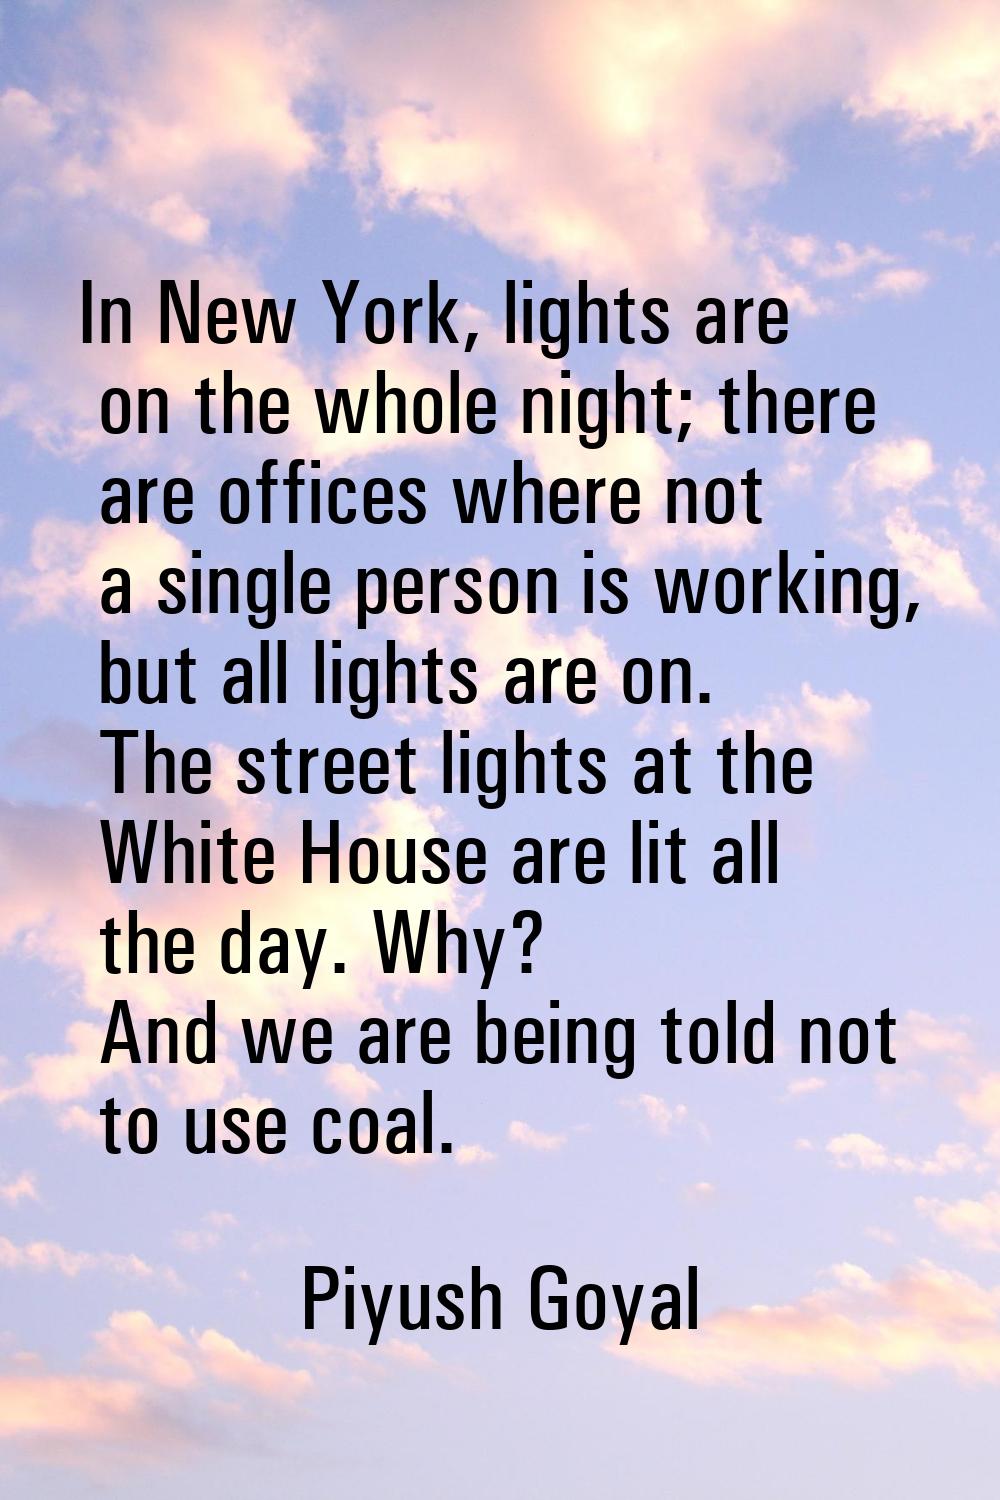 In New York, lights are on the whole night; there are offices where not a single person is working,